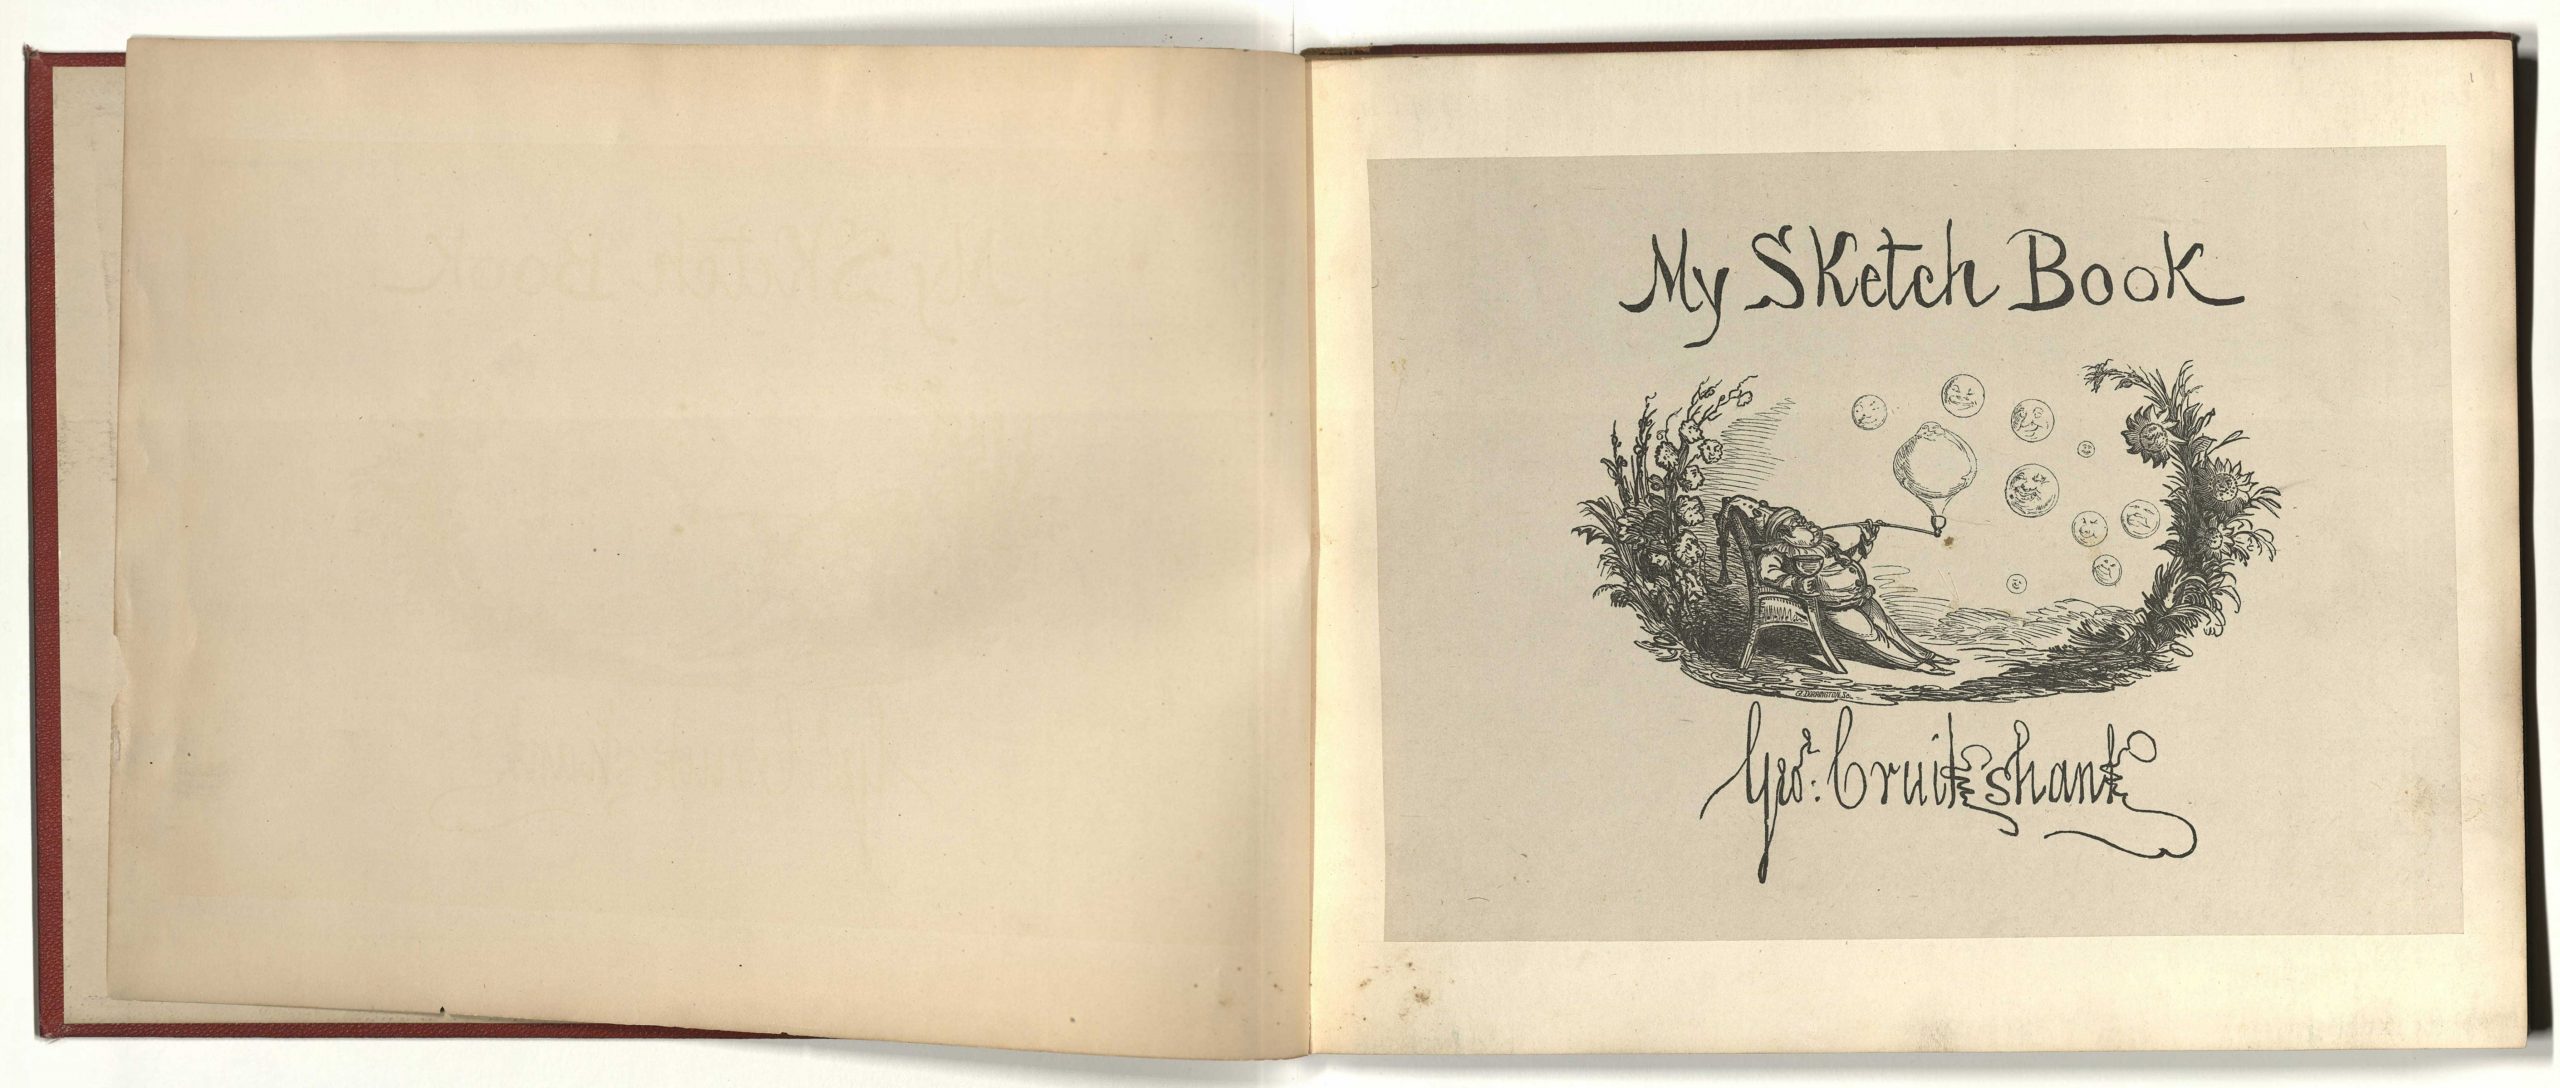 The text says "My Sketch Book" and includes a small figure smoking bubbles with a wreath of foliage around him. The signature of George Cruikshank is underneath.